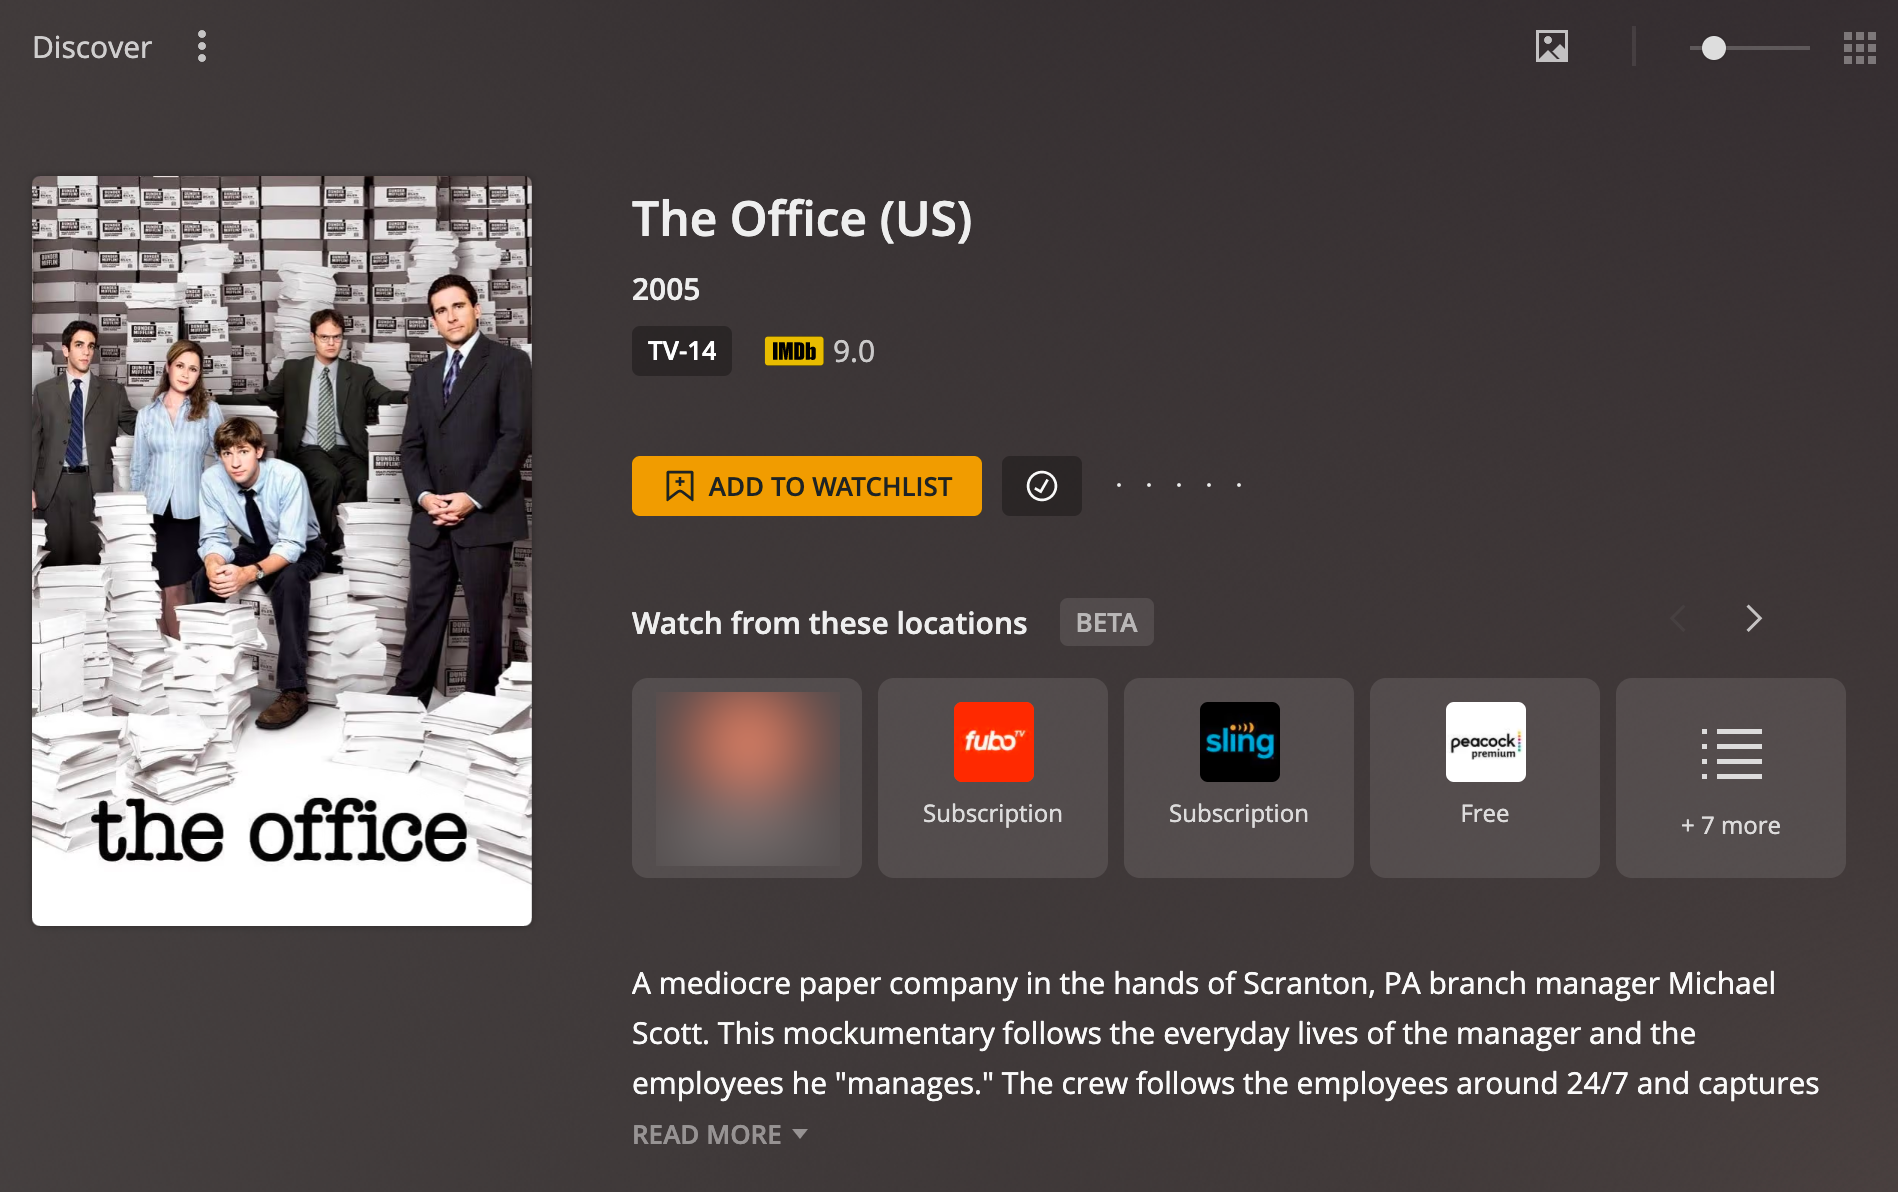 The Plex Discover interface, showing different options for watching The Office streaming online.